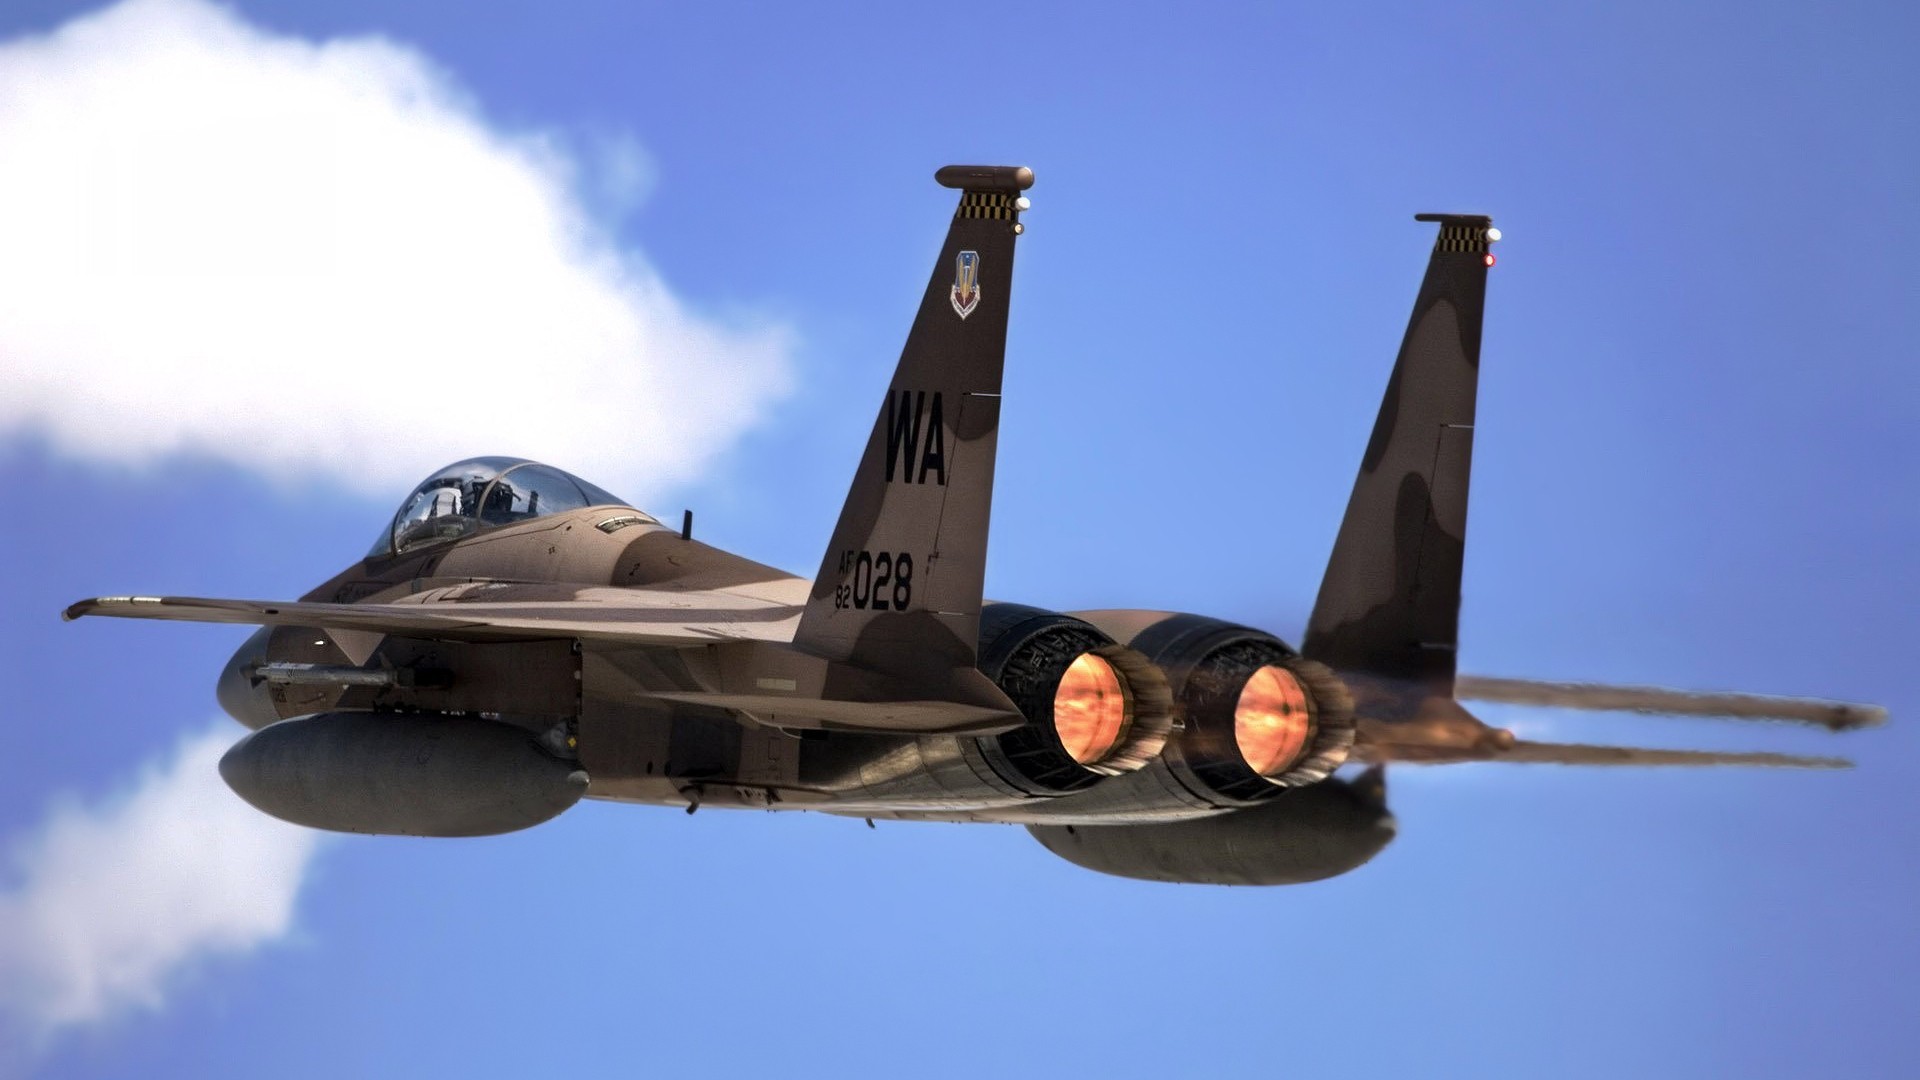 General 1920x1080 air force jet fighter military F-15 Eagle vehicle military aircraft aircraft American aircraft General Dynamics clouds military vehicle afterburner